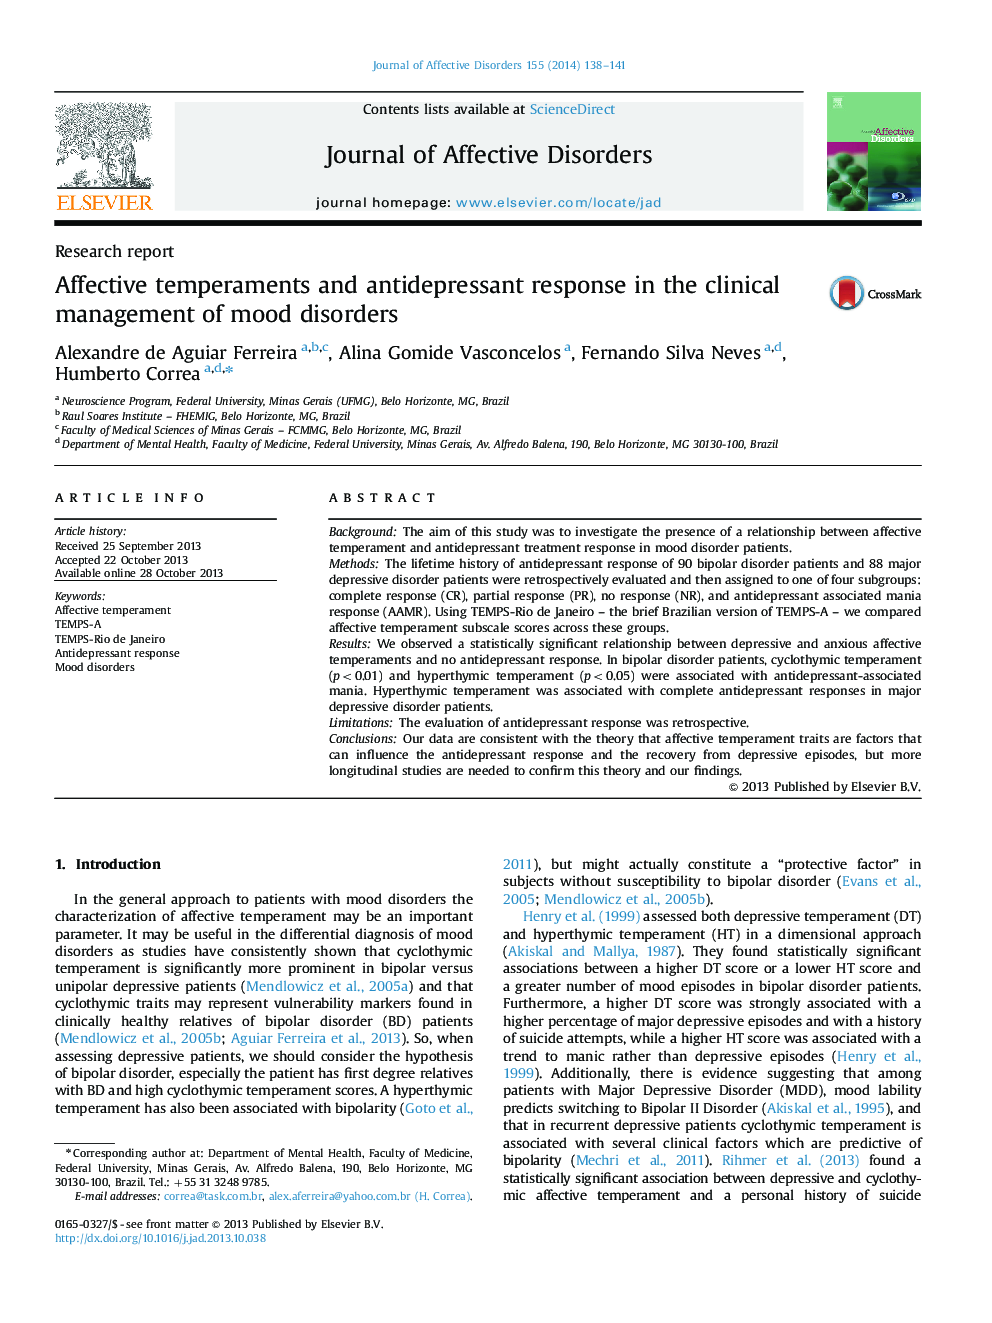 Affective temperaments and antidepressant response in the clinical management of mood disorders